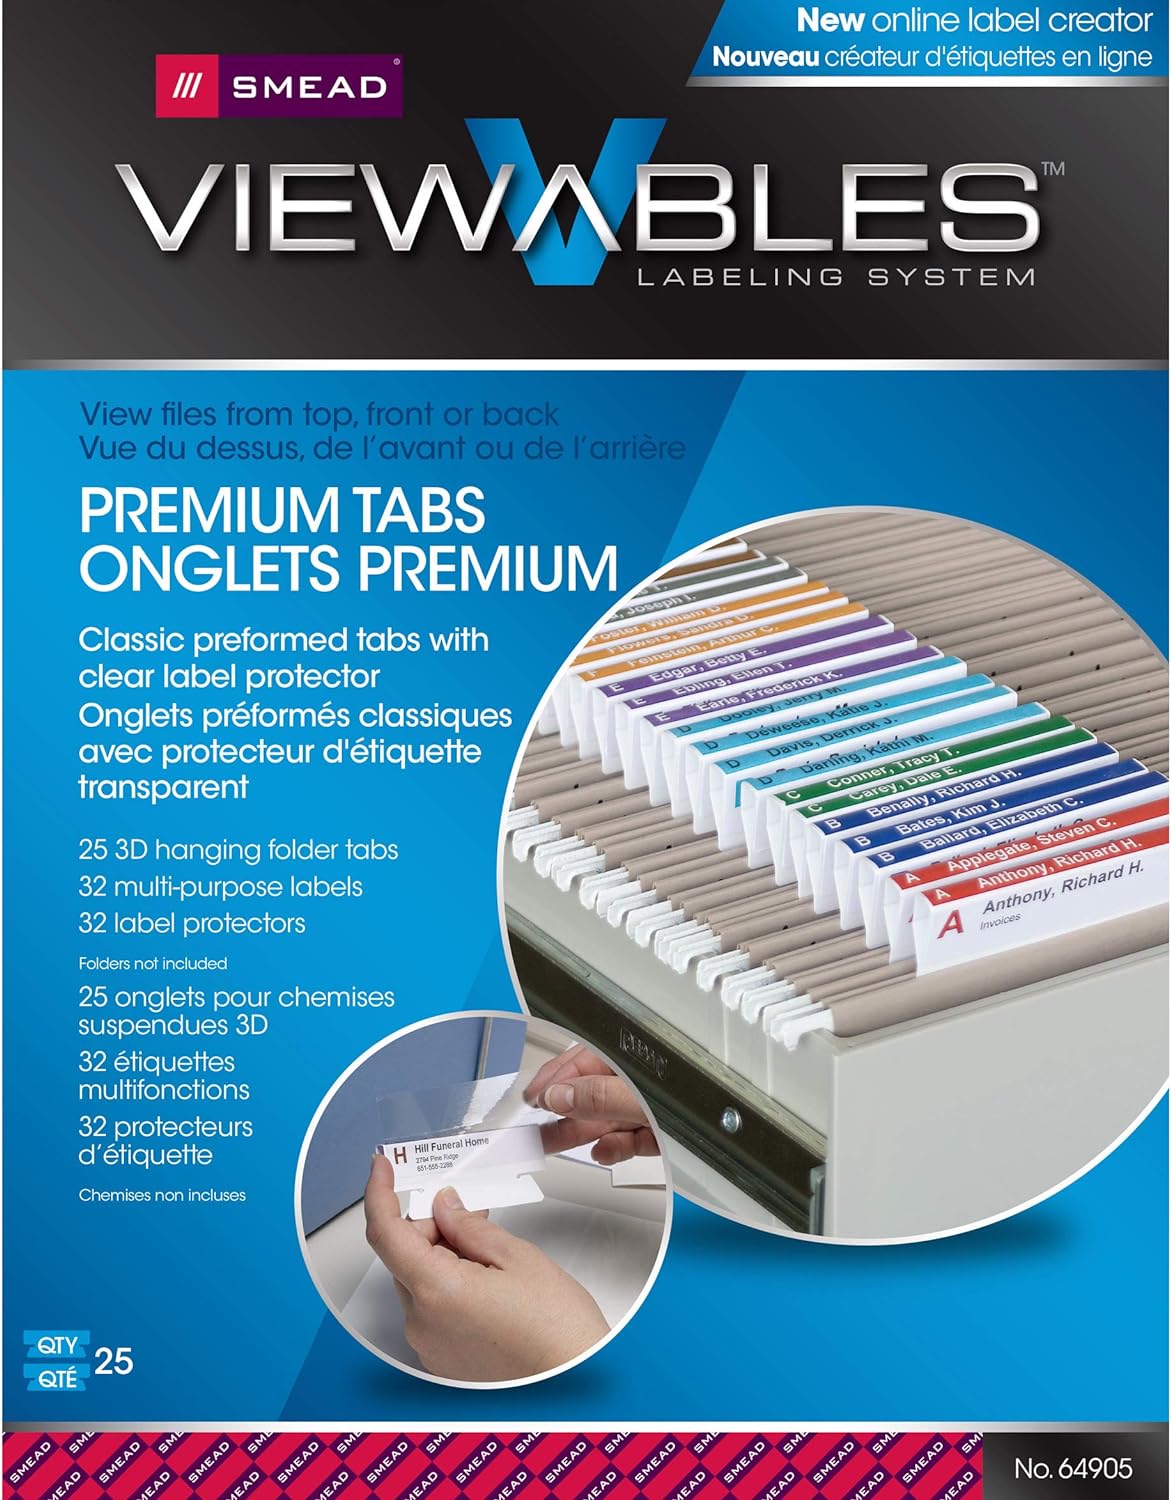 Smead, 64905, Viewables Color Labeling System, 1 1/4" Width x 3 1/2" Length, Assorted Colors, 25 Tabs/Pack, Sold As 1 Pack